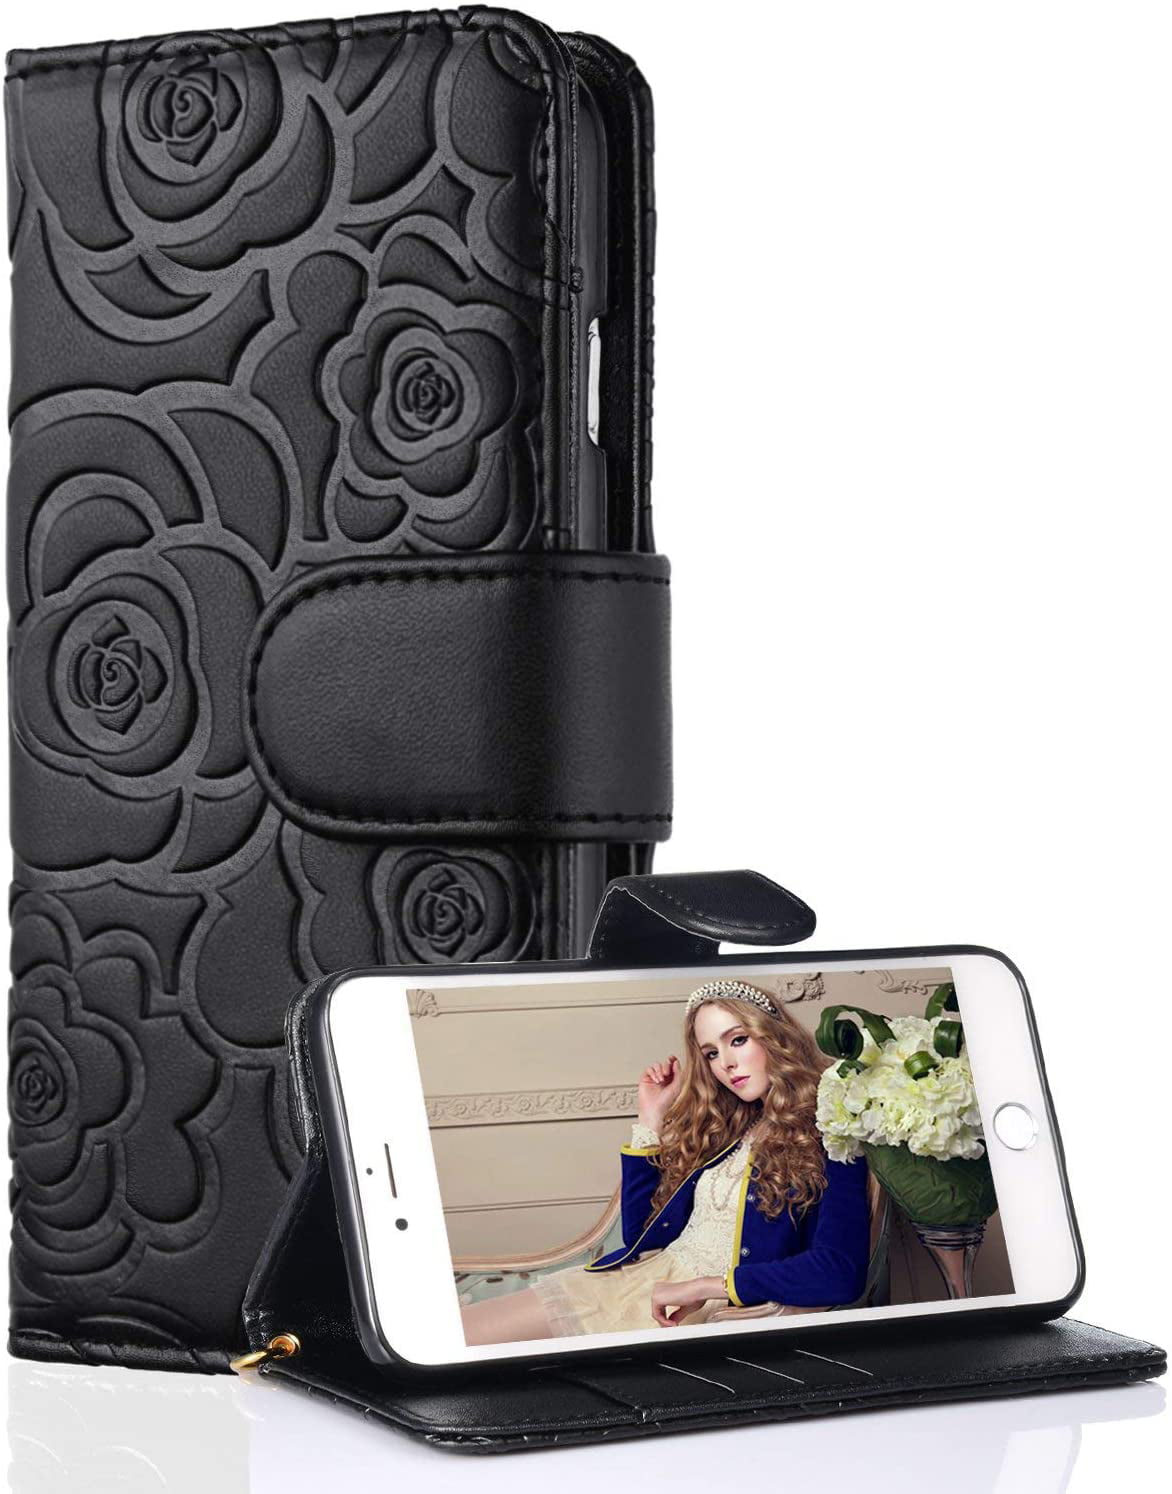 Case Compatible With Iphone 7 16 Iphone 8 17 Iphone Se 4 7 Inch Wallet Case For Women And Girls With Card Holder Premium Leather Embossed Flower Flip Case With Wrist Strap Black Walmart Com Walmart Com